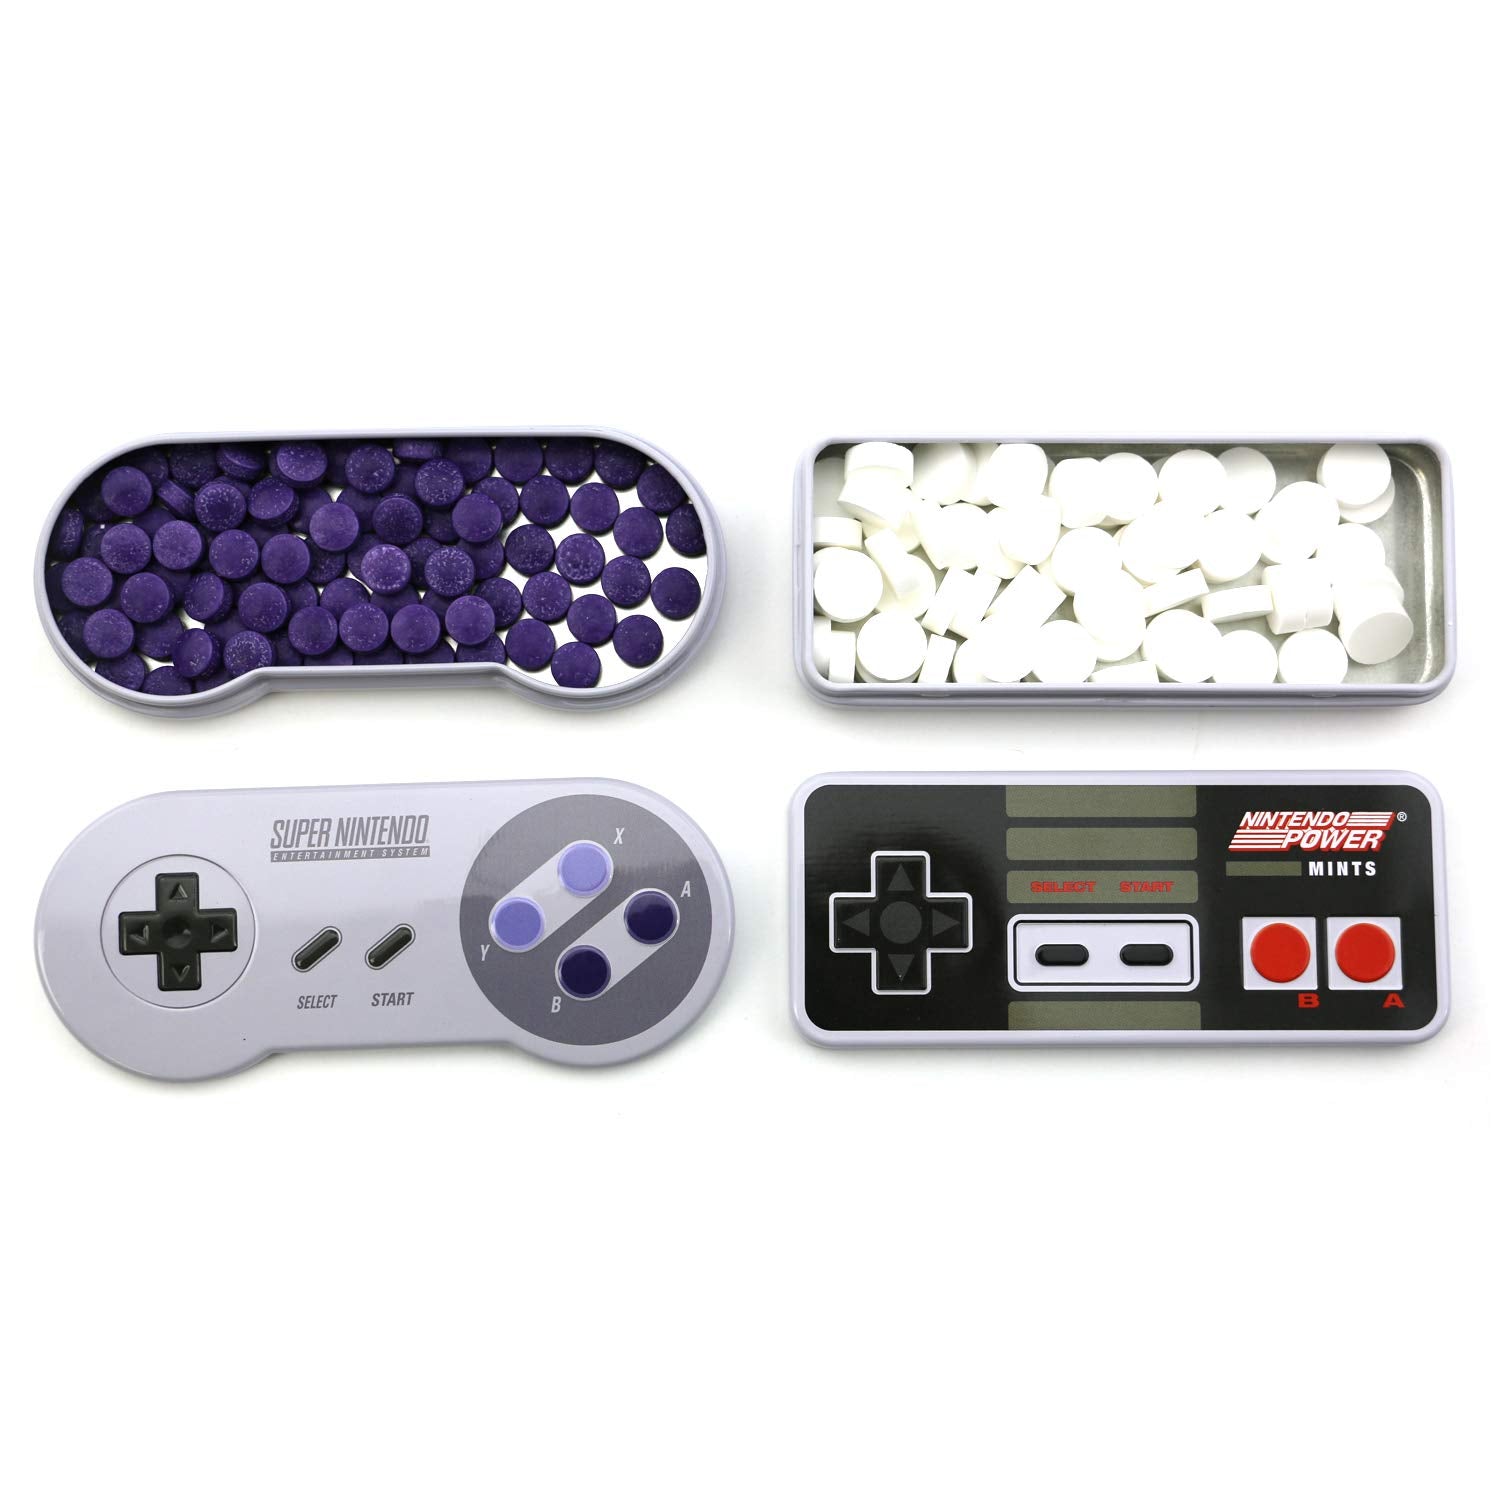 SNES, NES Nintendo Controller Tin Candy and Mints (2 Pack) Wild Berry and Peppermint Flavor Gift Stuffer with 2 GosuToys Stickers